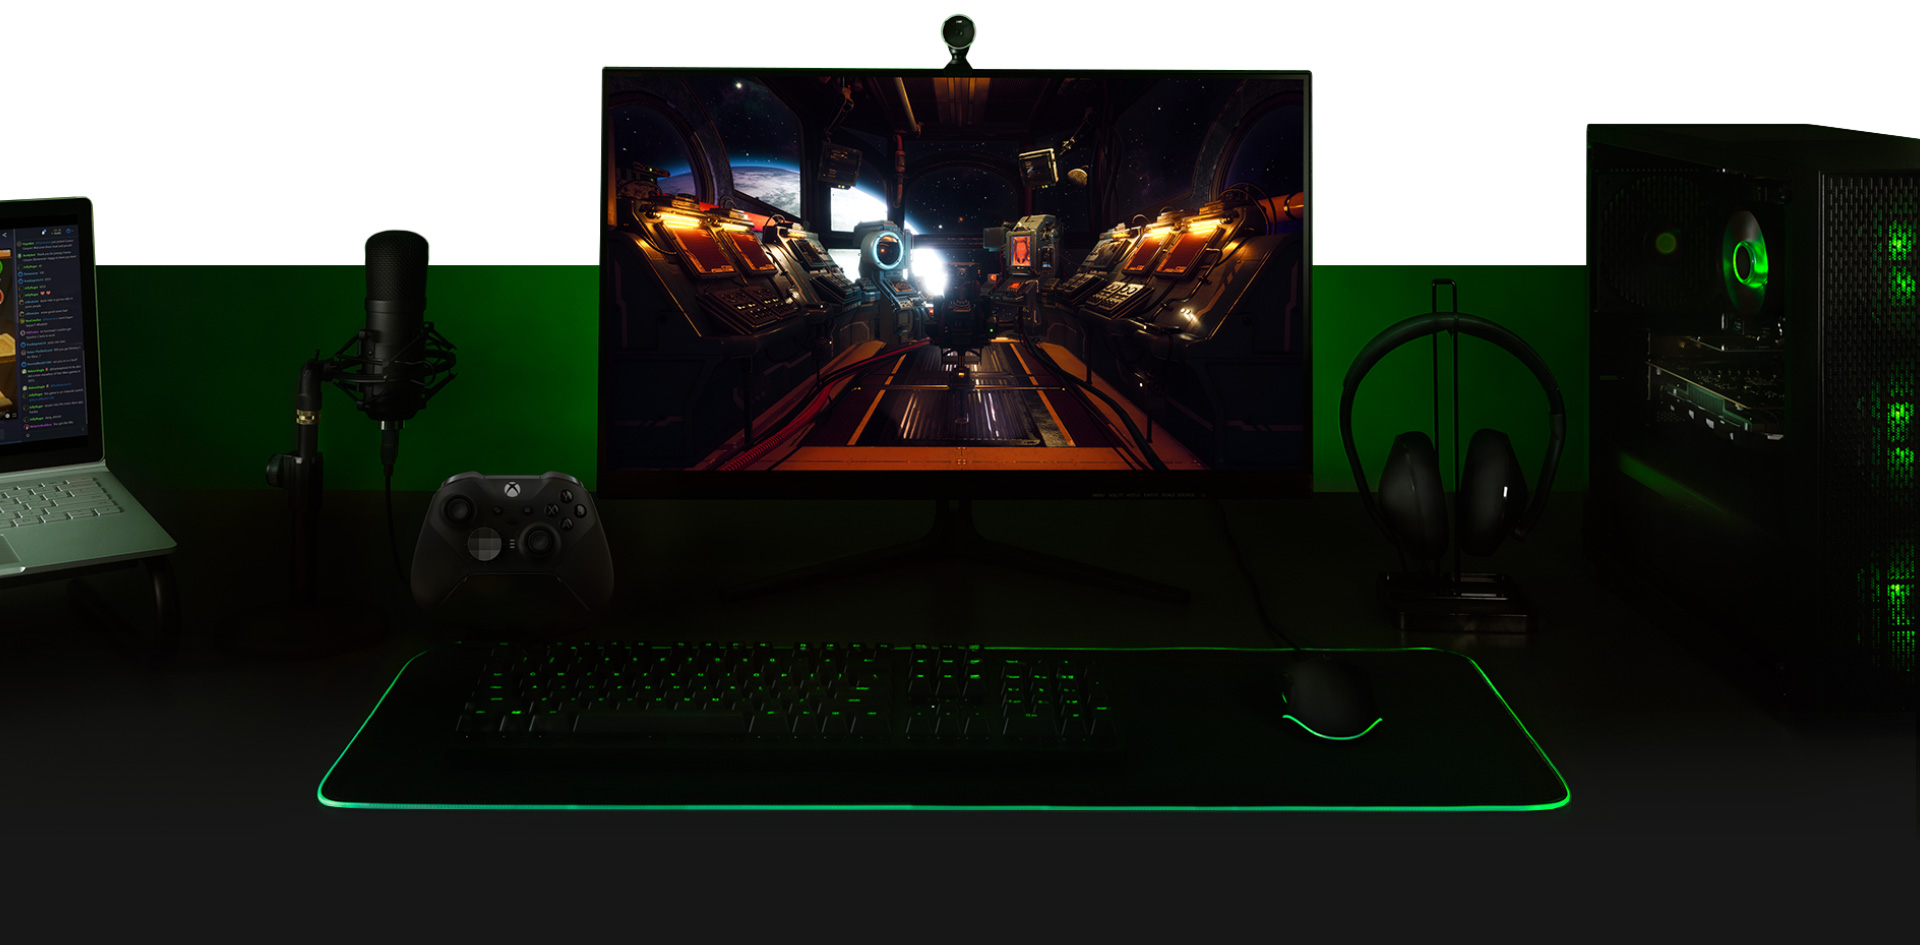 Desktop with a PC, monitor with The Outer Worlds game screen, keyboard, Xbox One controller, microphone and a laptop all set up together.